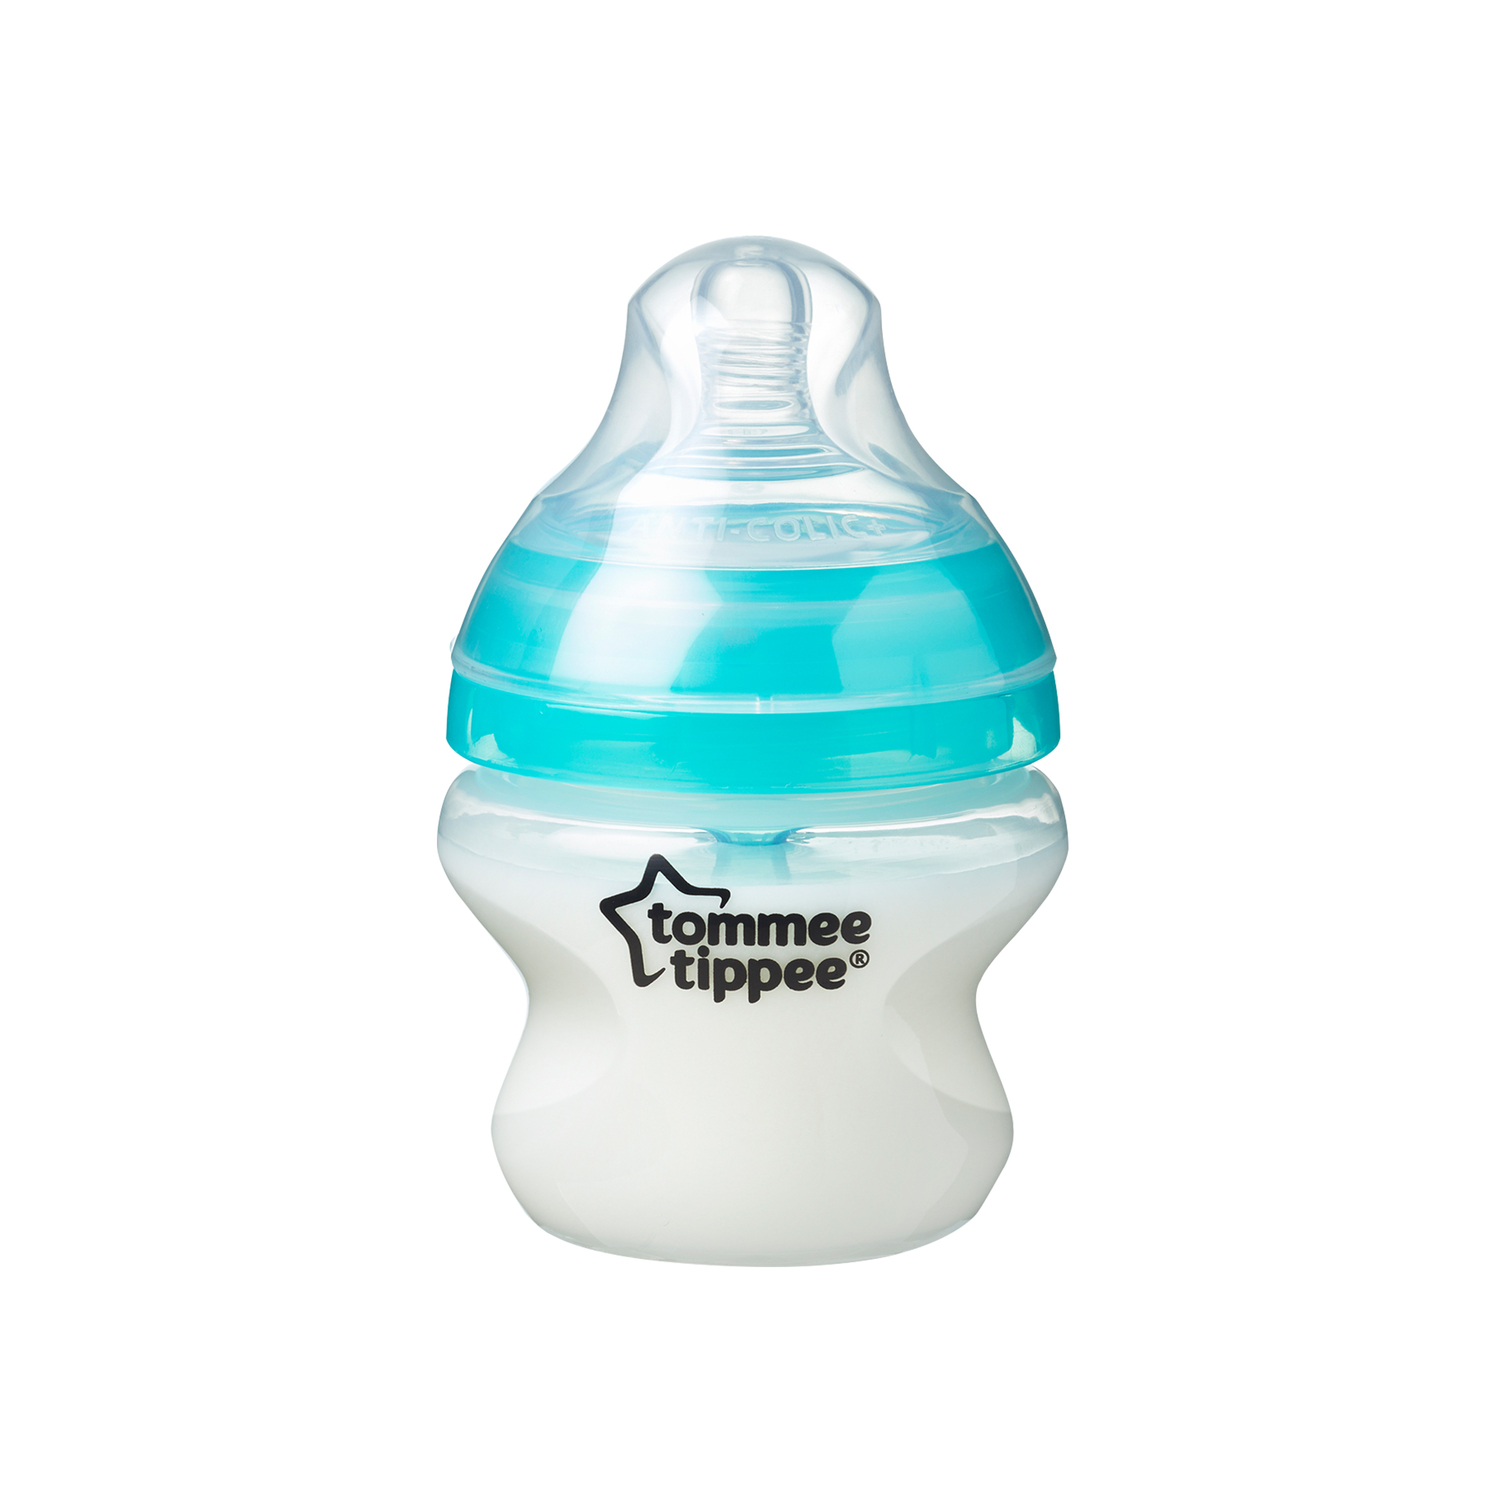 Tommee Tippee Advanced Anti-Colic Baby Bottles – 5oz, Clear, 2pk - image 3 of 10